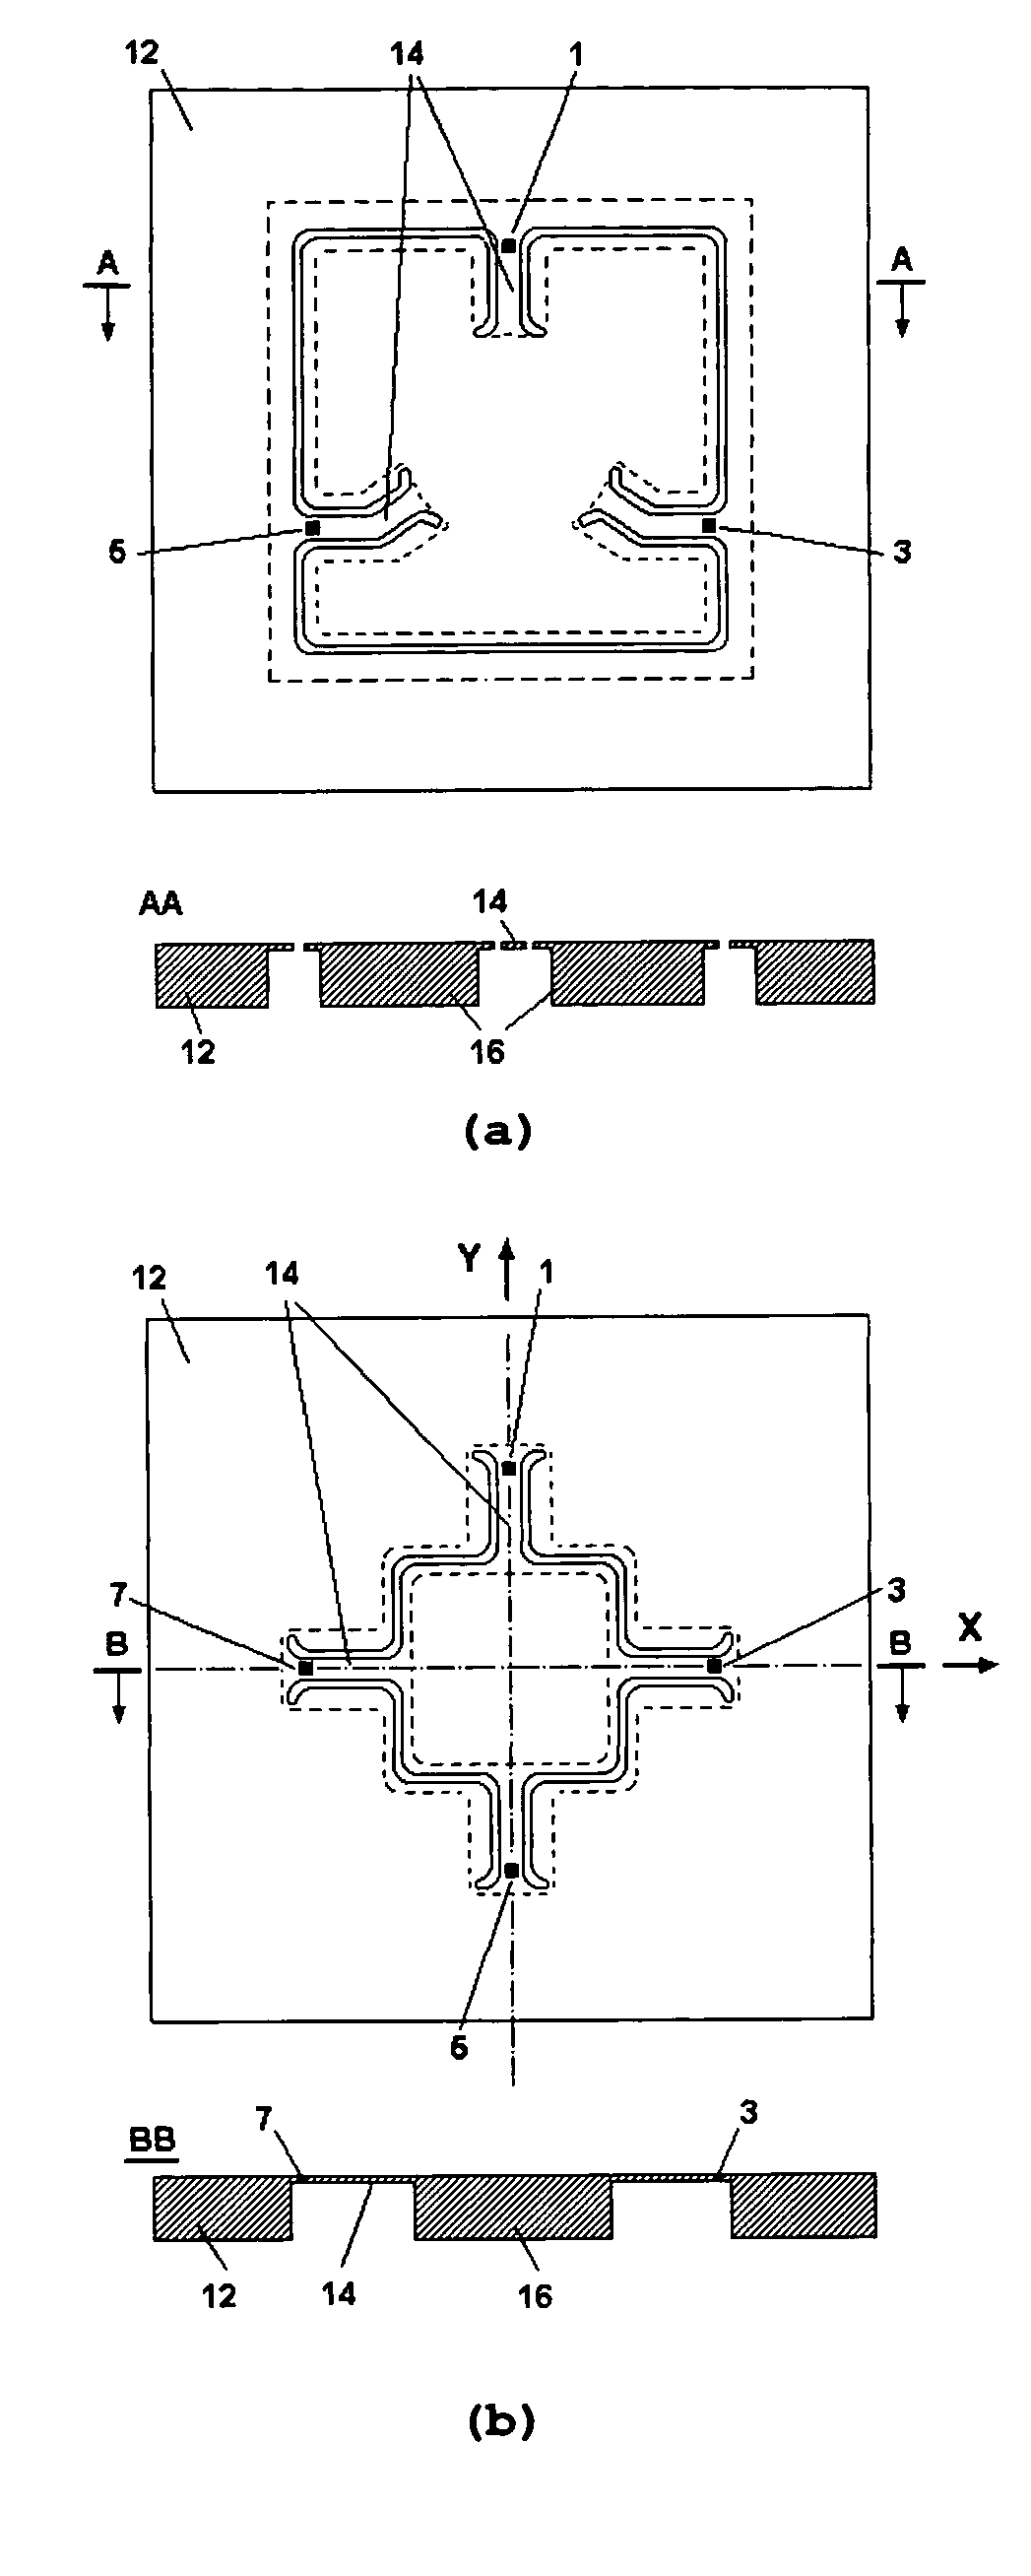 System and method for a three-axis MEMS accelerometer